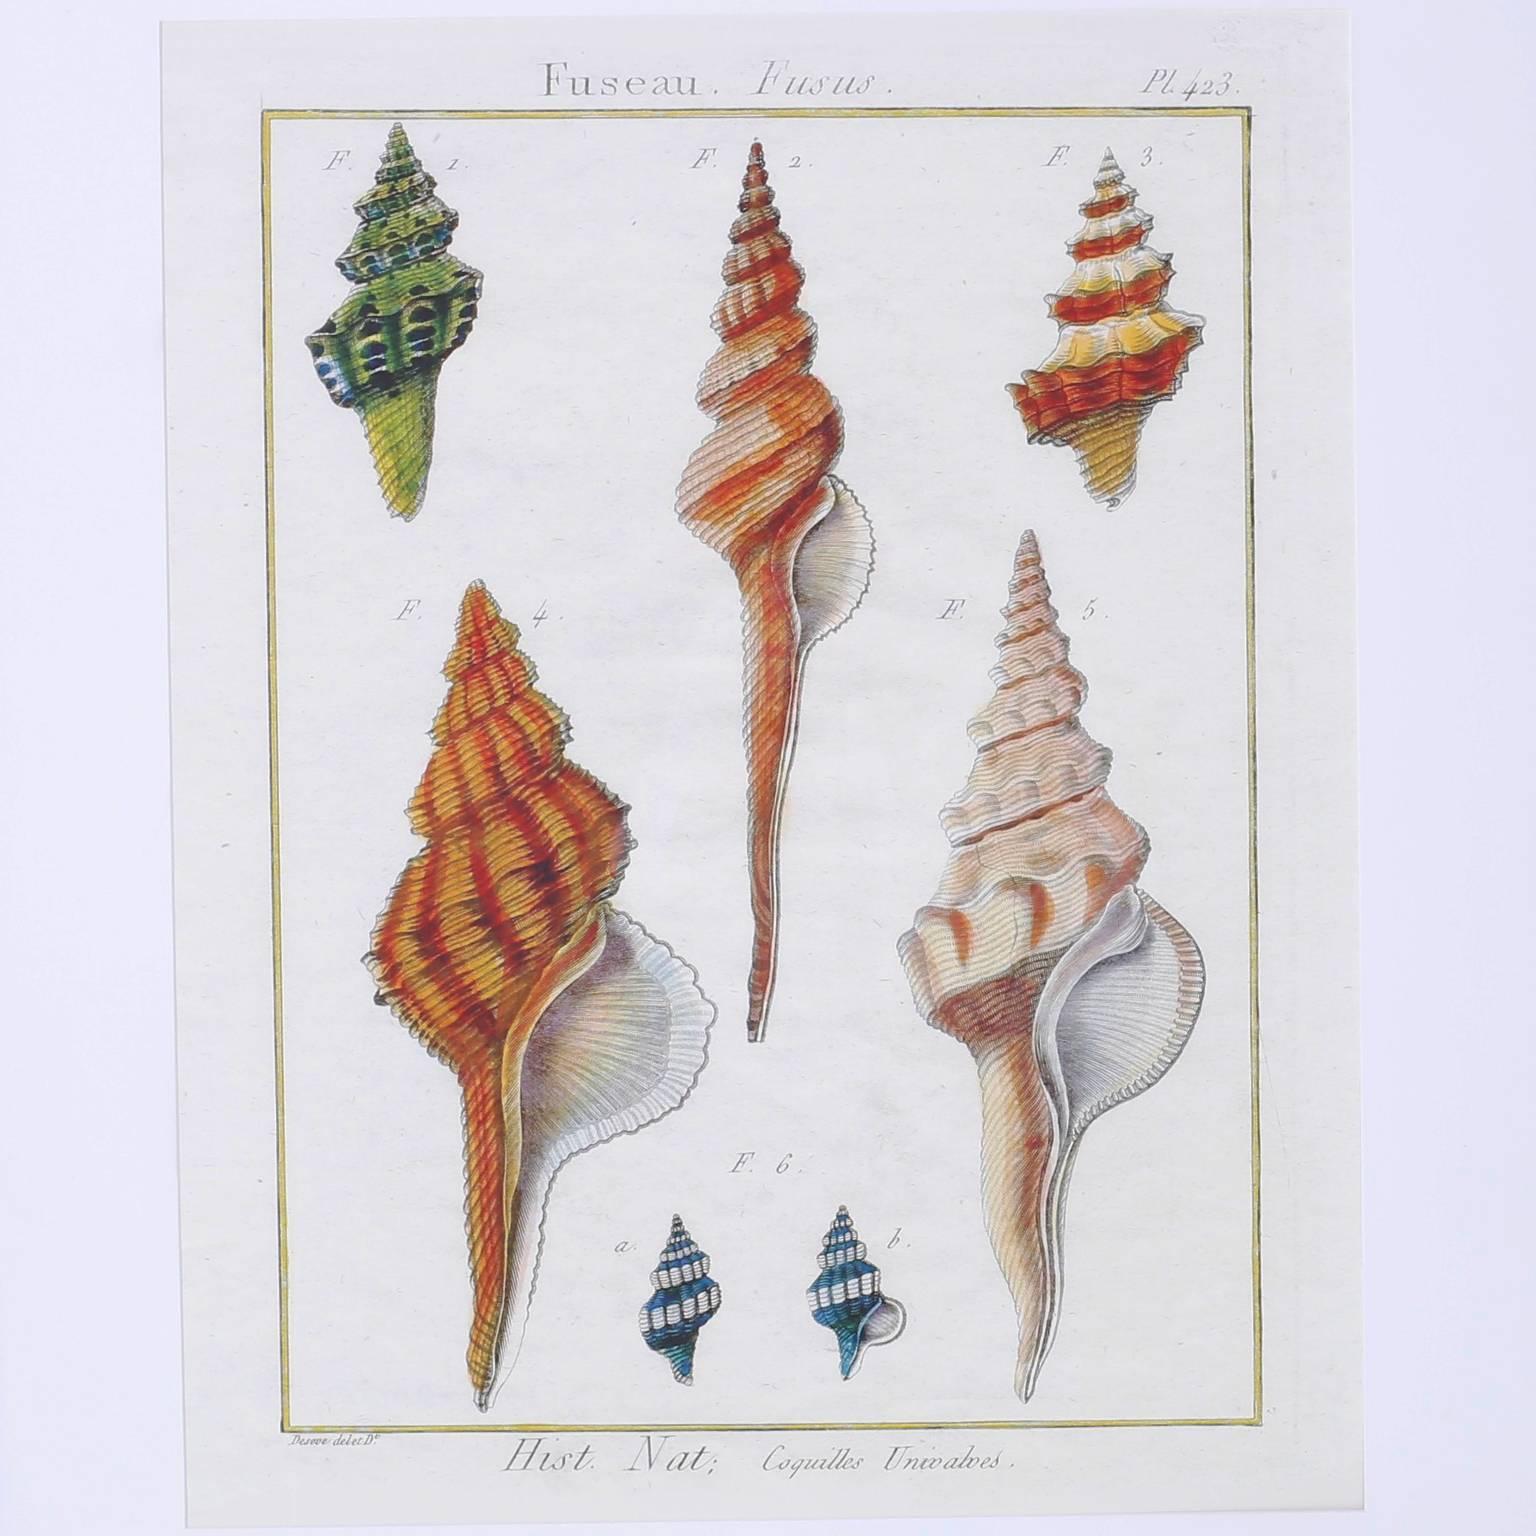 Impressive set of three large vintage hand colored engravings depicting seashell specimens executed in the scholastic style of the early naturalists. Having plenty of decorative appeal, large scale, and black lacquered wood frames. Priced